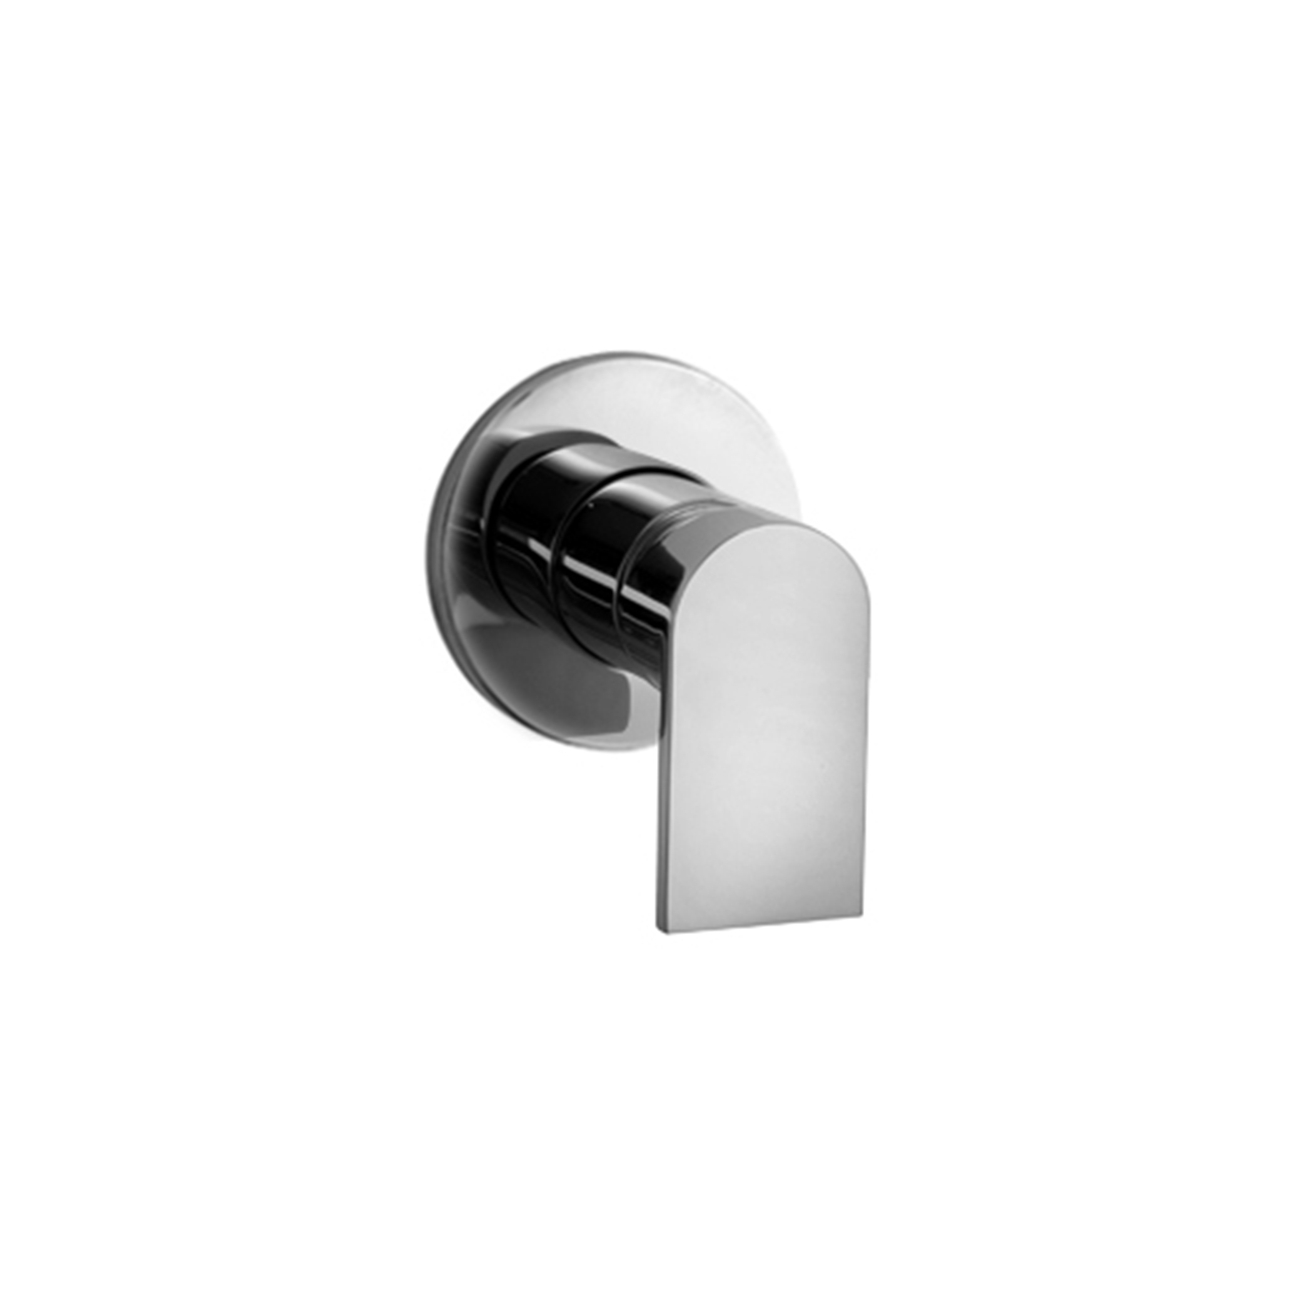 FANTINI MARE BUILT-IN SHOWER MIXER